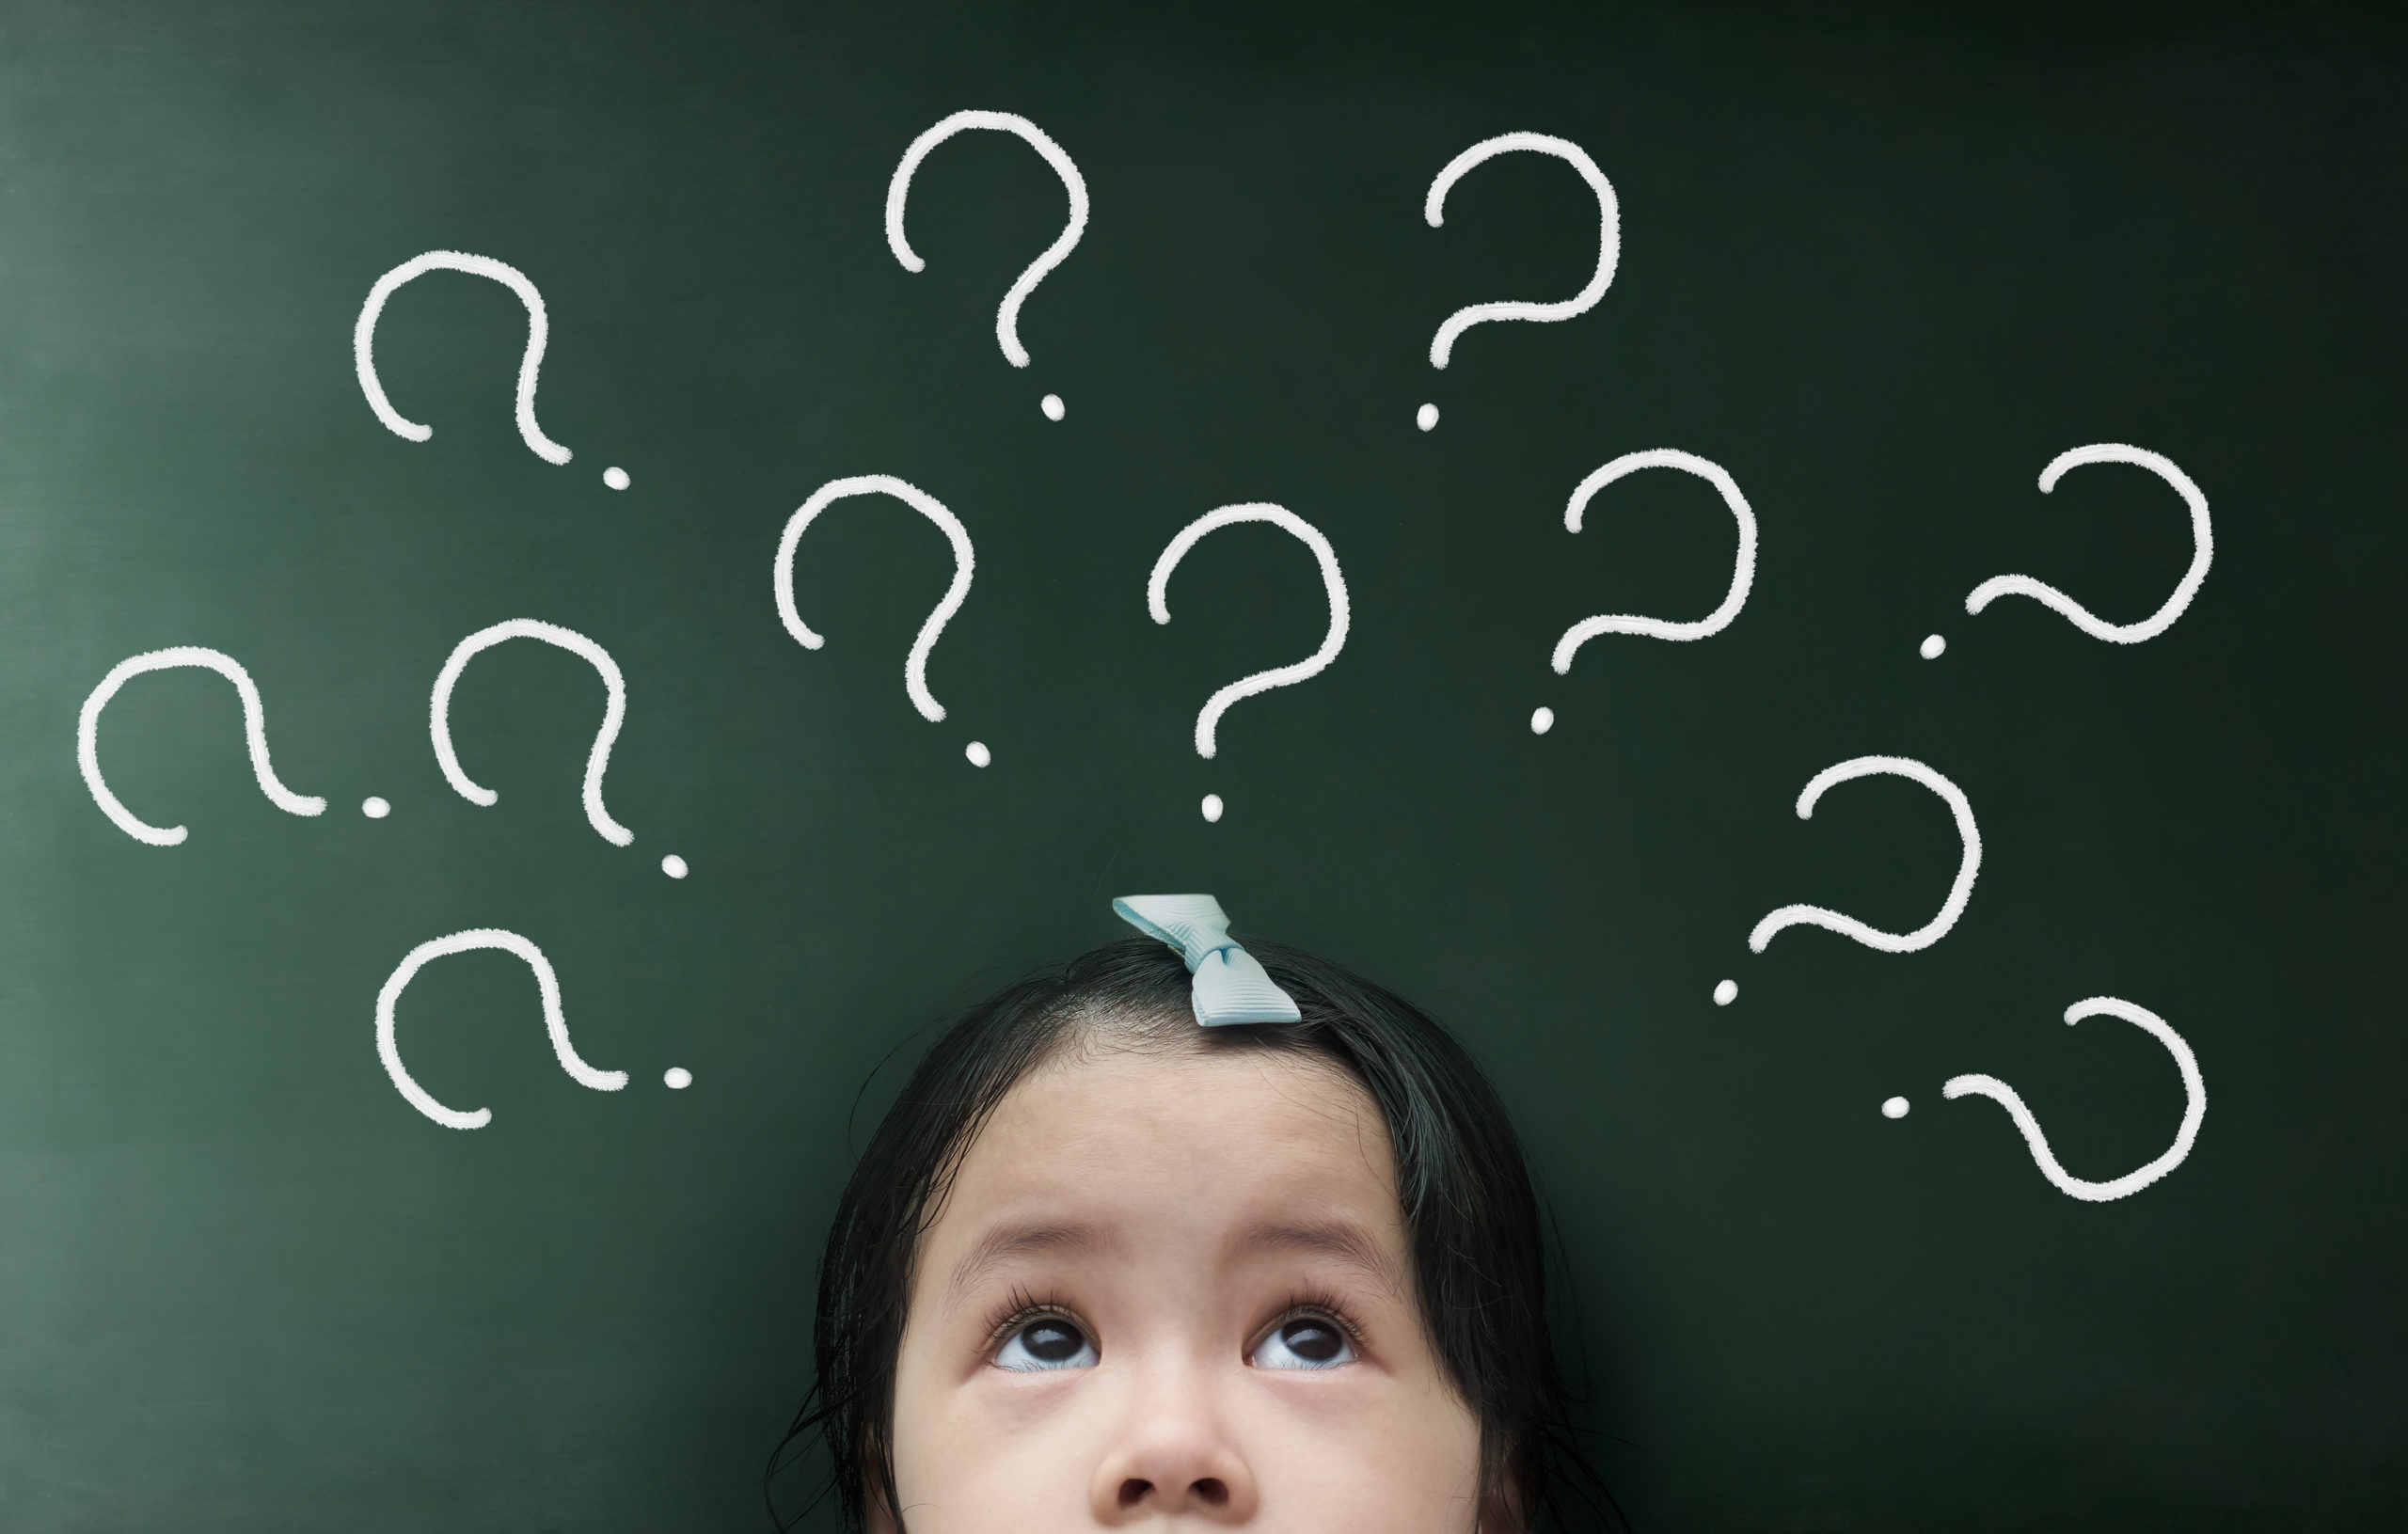 little girl thinking with question mark over her head